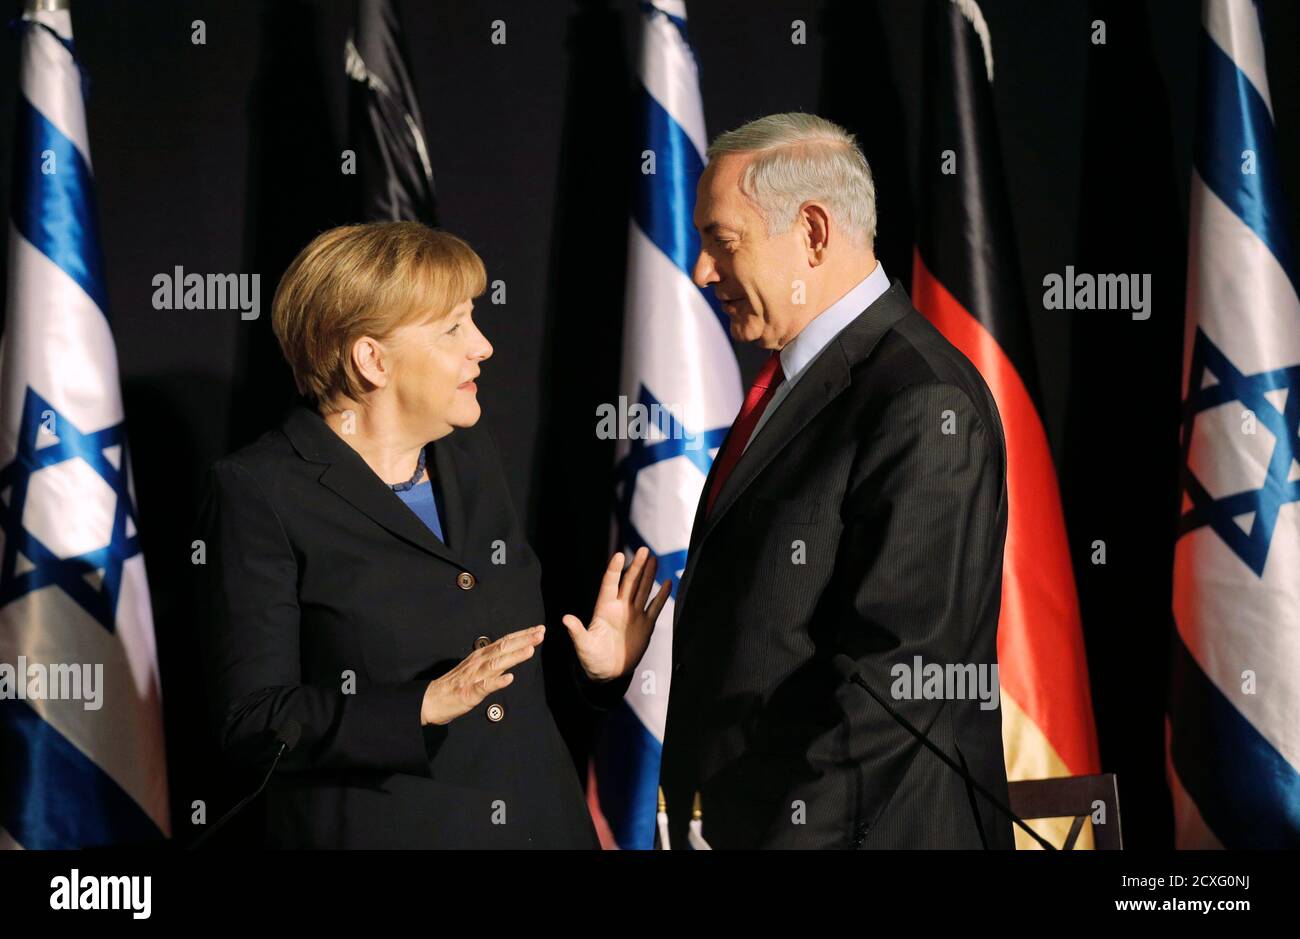 Israel's Prime Minister Benjamin Netanyahu (R) stands next to German Chancellor Angela Merkel after their joint news conference in Jerusalem February 25, 2014. Germany views Iran as a potential threat not just to Israel, but also to European countries, Chancellor Angela Merkel said on Tuesday. REUTERS/Ammar Awad    (JERUSALEM - Tags: POLITICS) Stock Photo